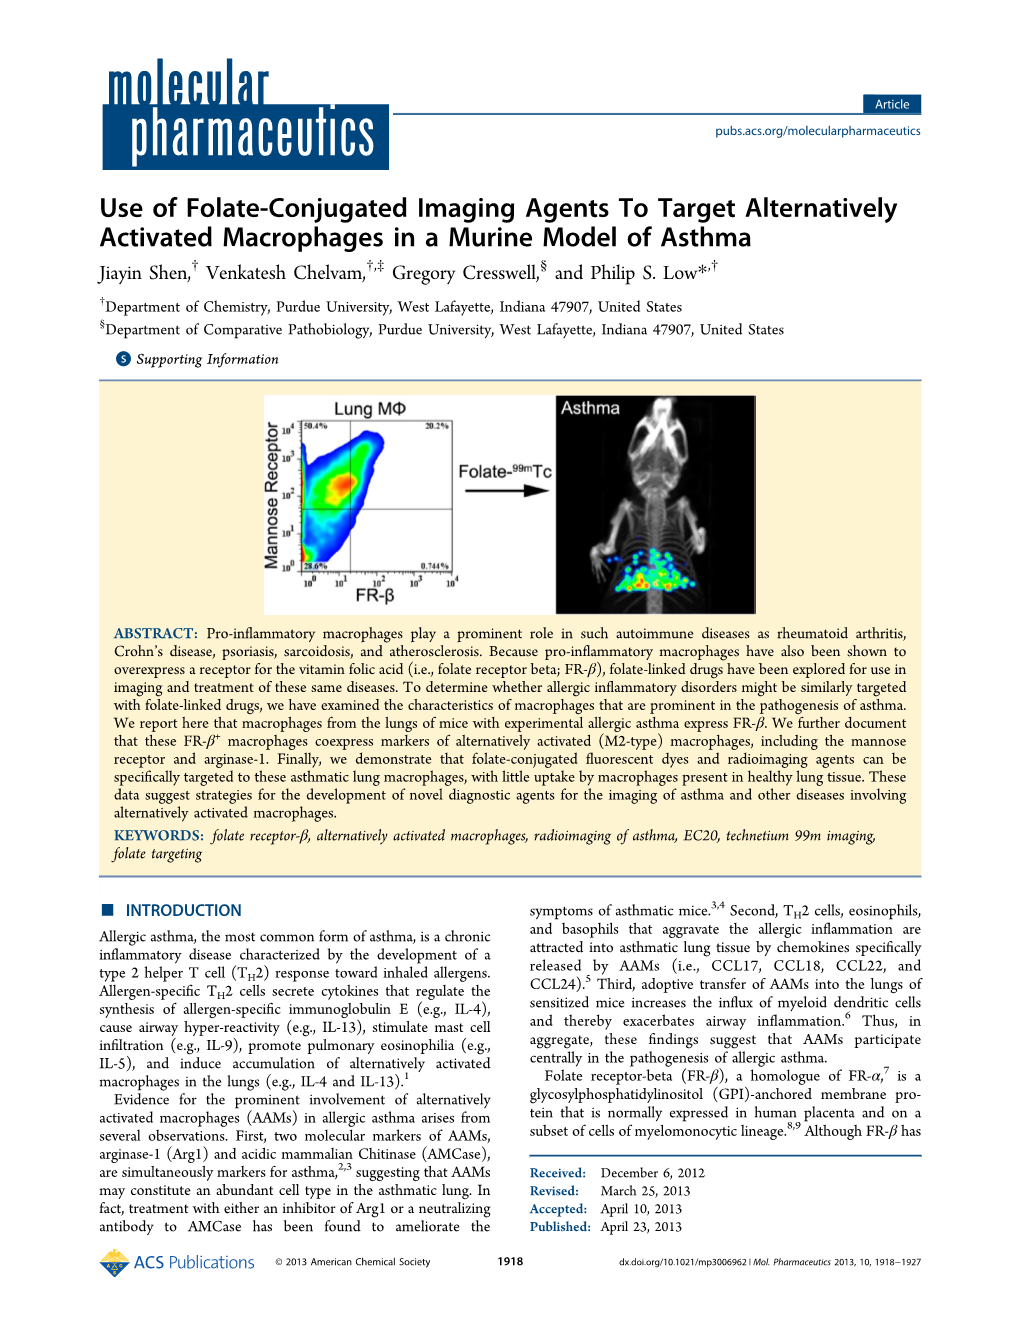 Use of Folate-Conjugated Imaging Agents to Target Alternatively